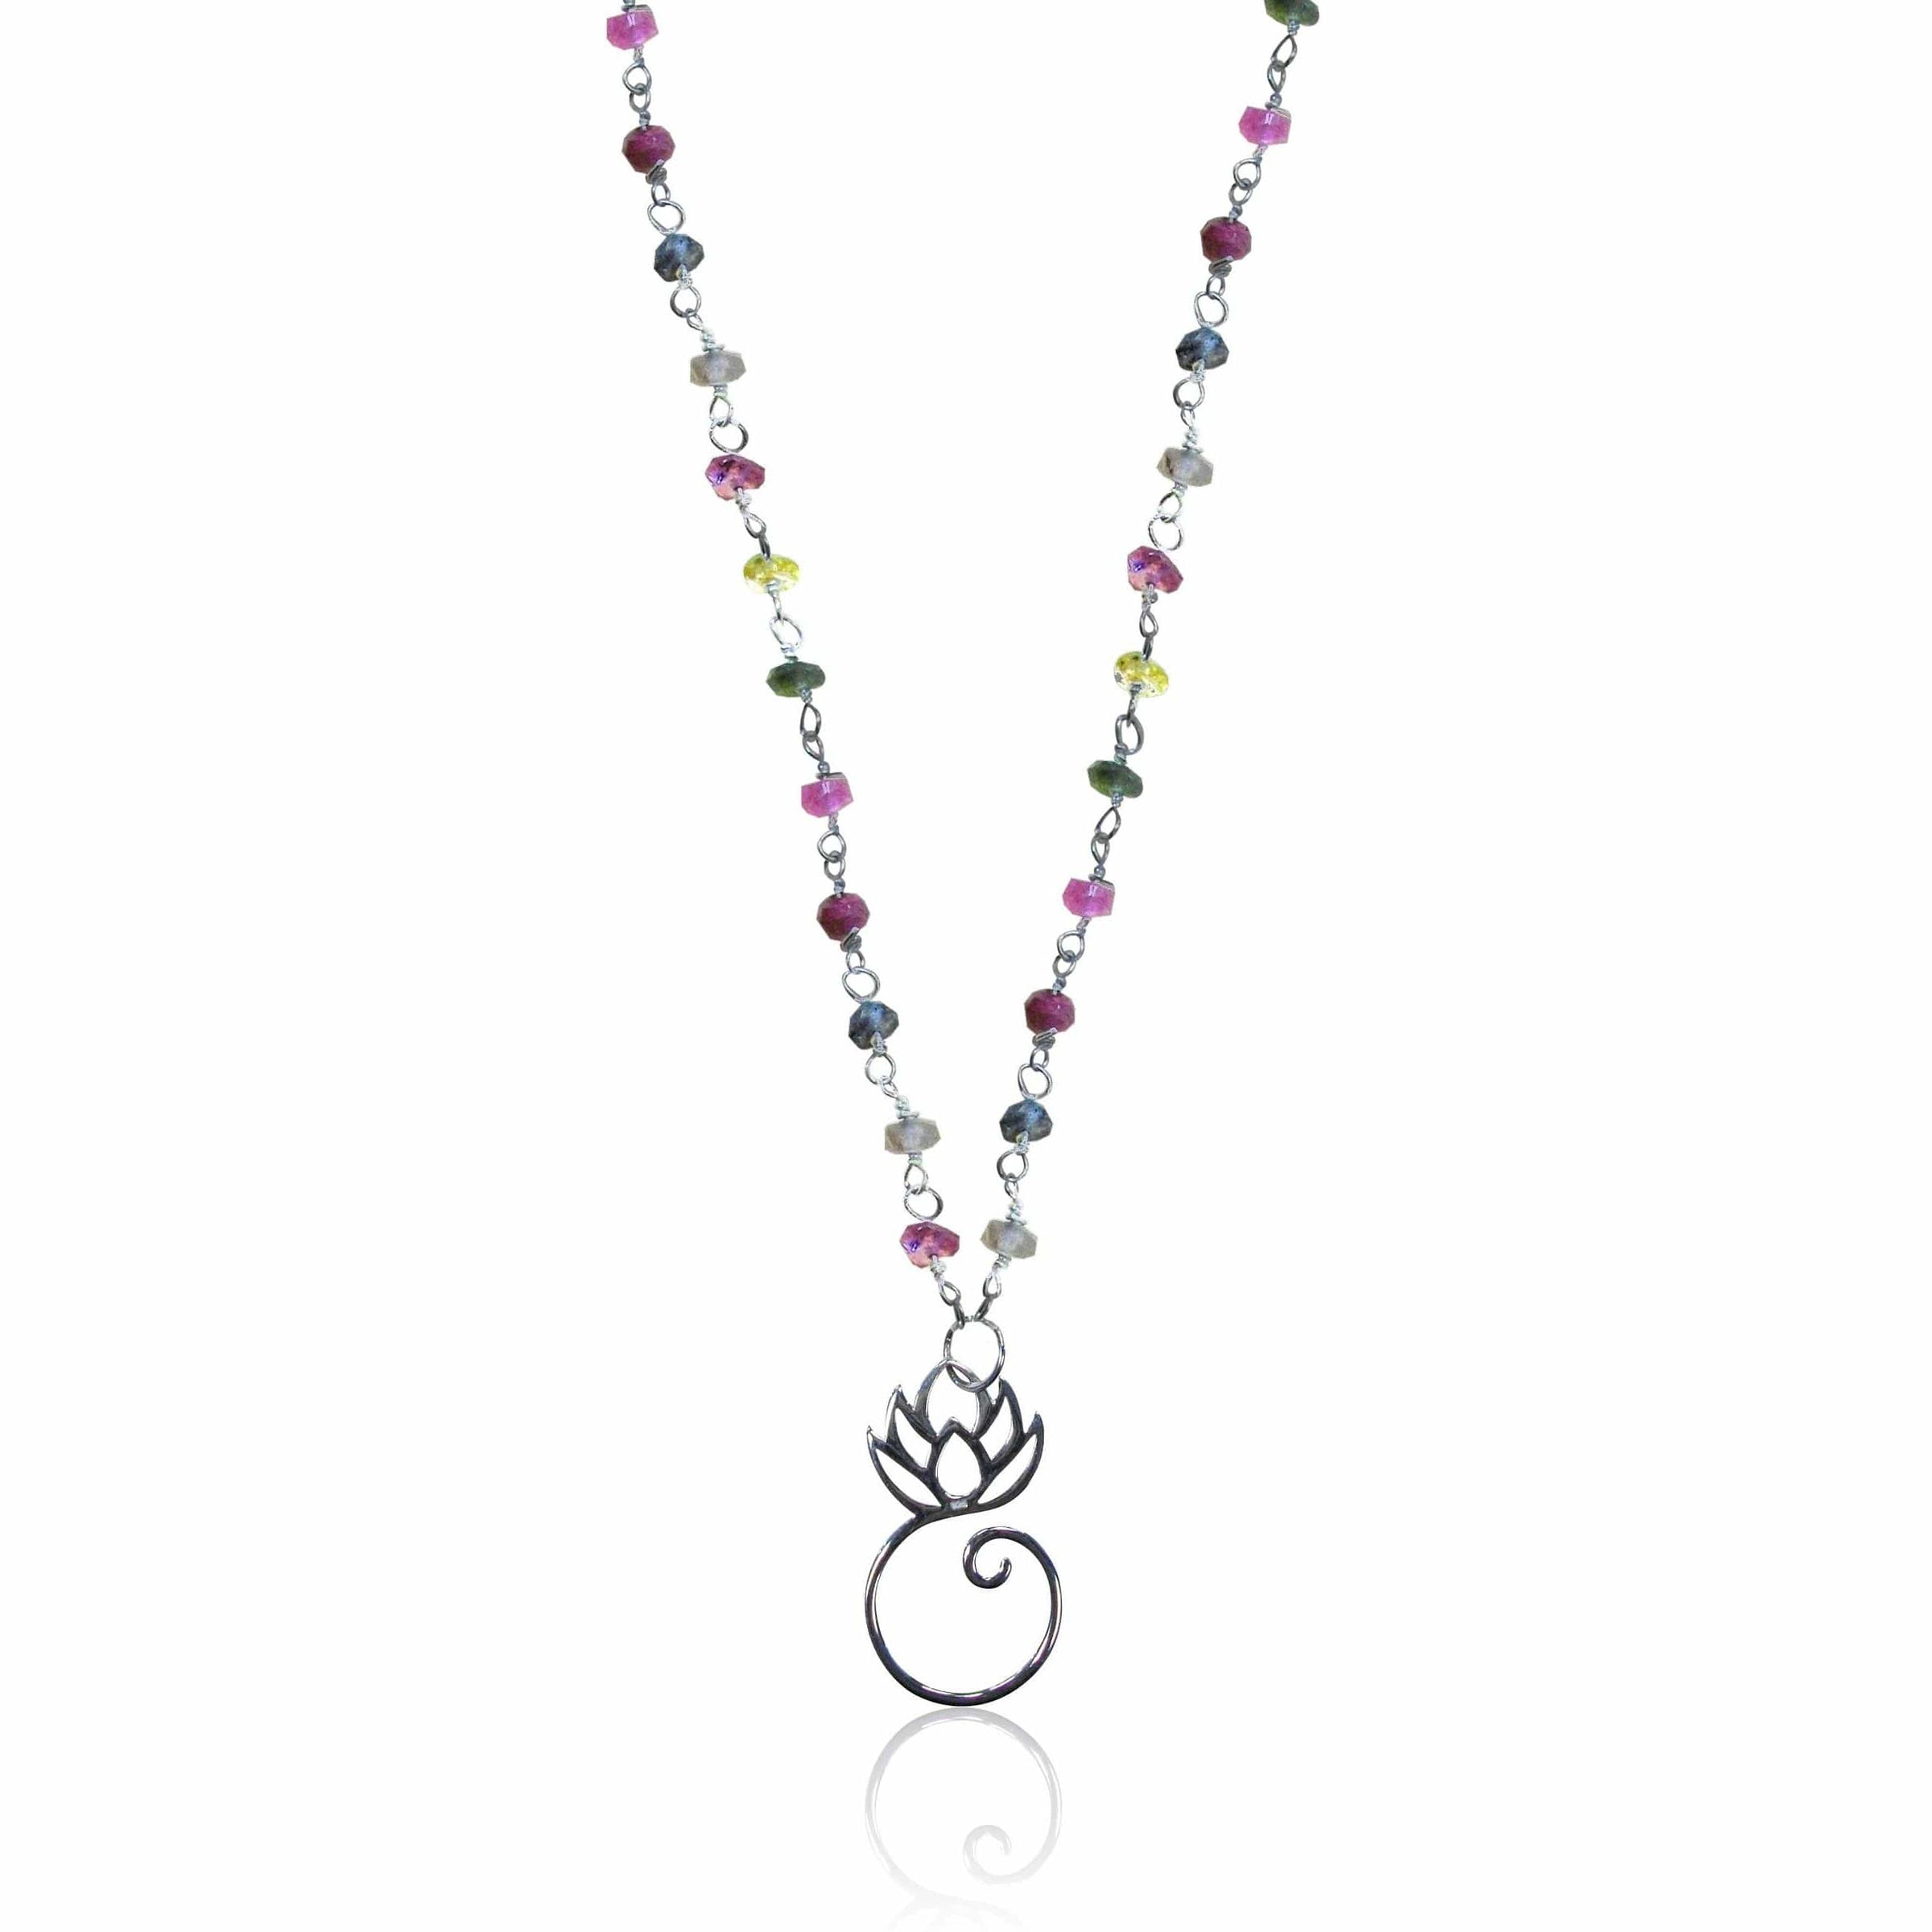 Rainbow Tourmaline Necklace with Lotus Flower for Tolerance